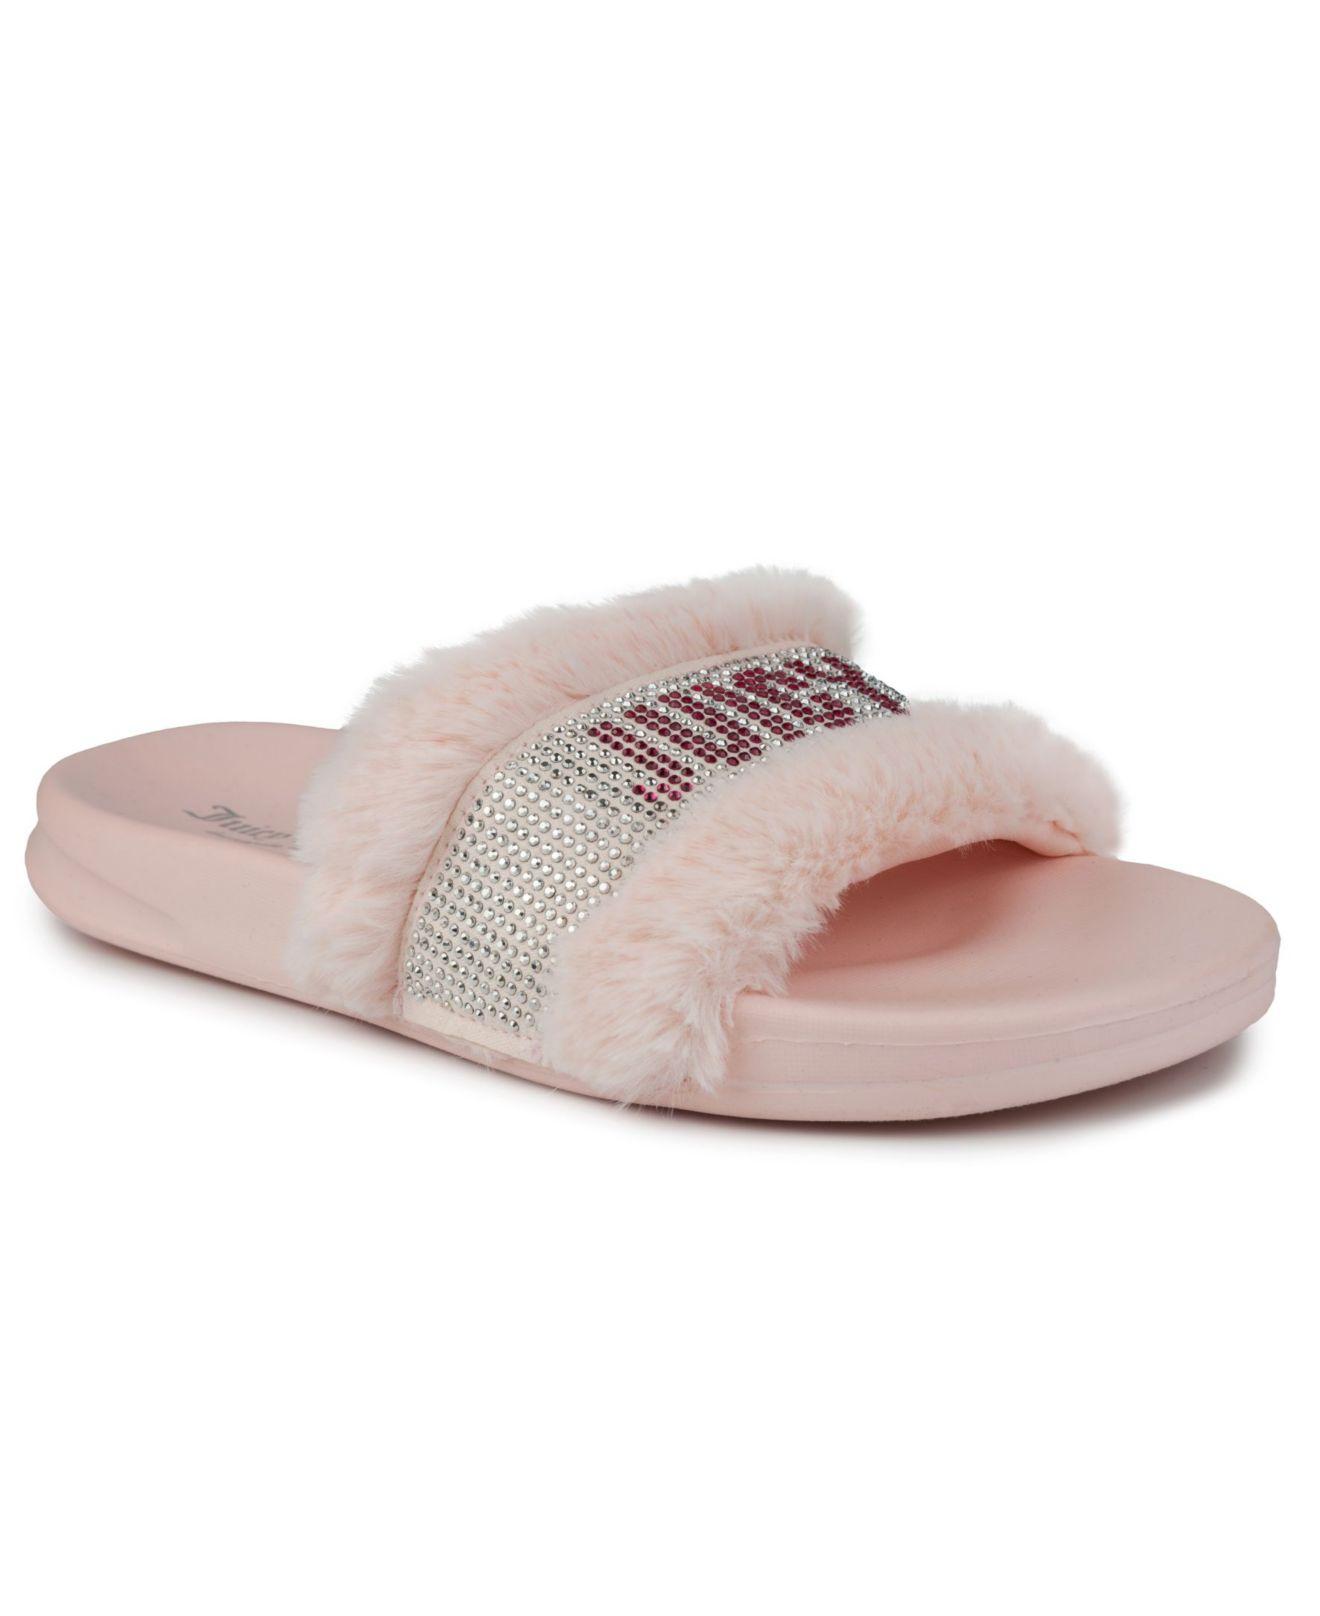 Juicy Couture Steady Faux Fur Sandal Slide in Pink | Lyst